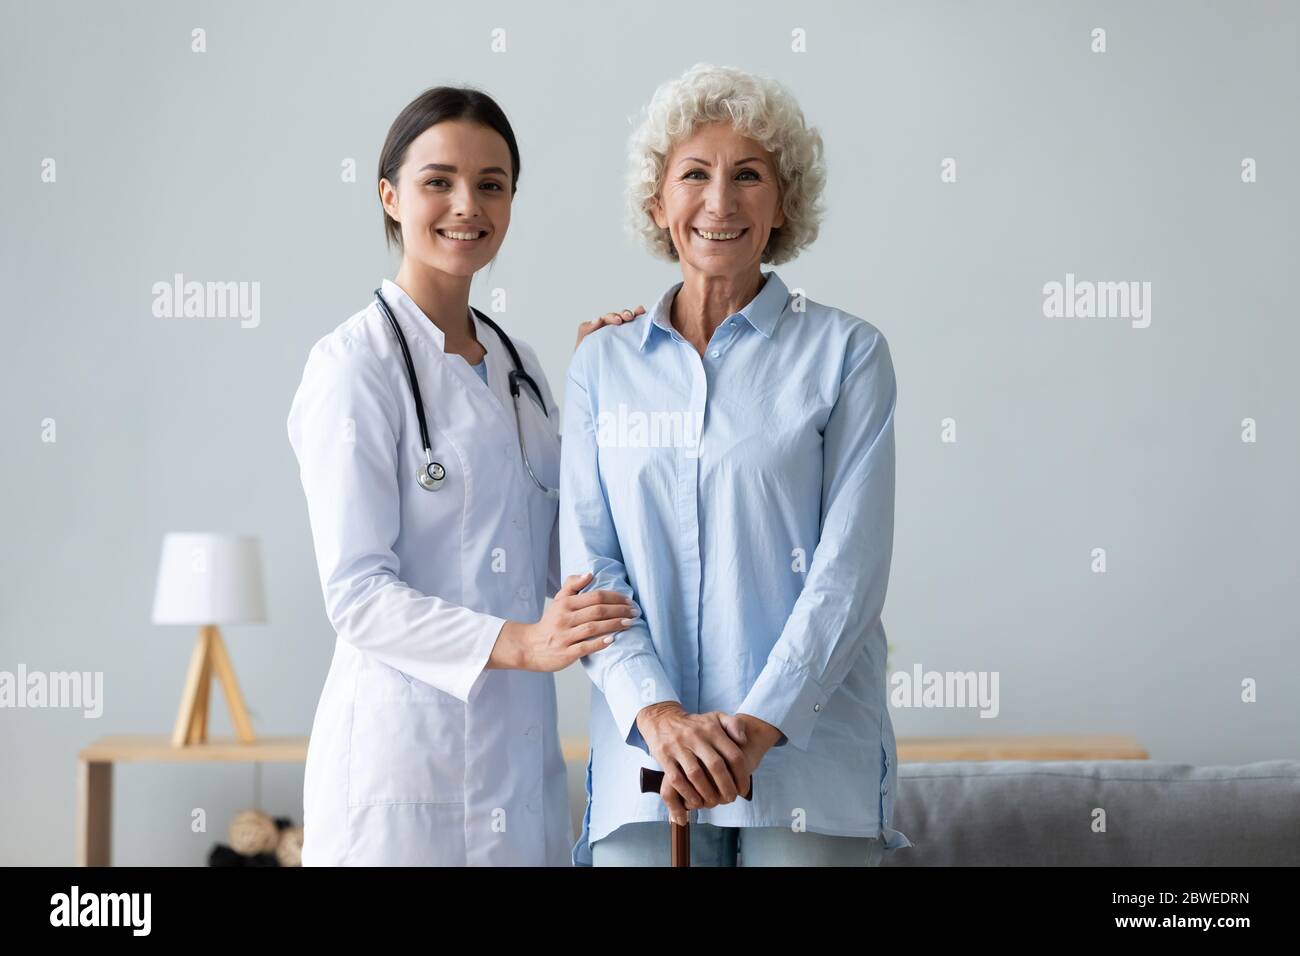 Old patient with walking stick and young caring nurse portrait Stock Photo